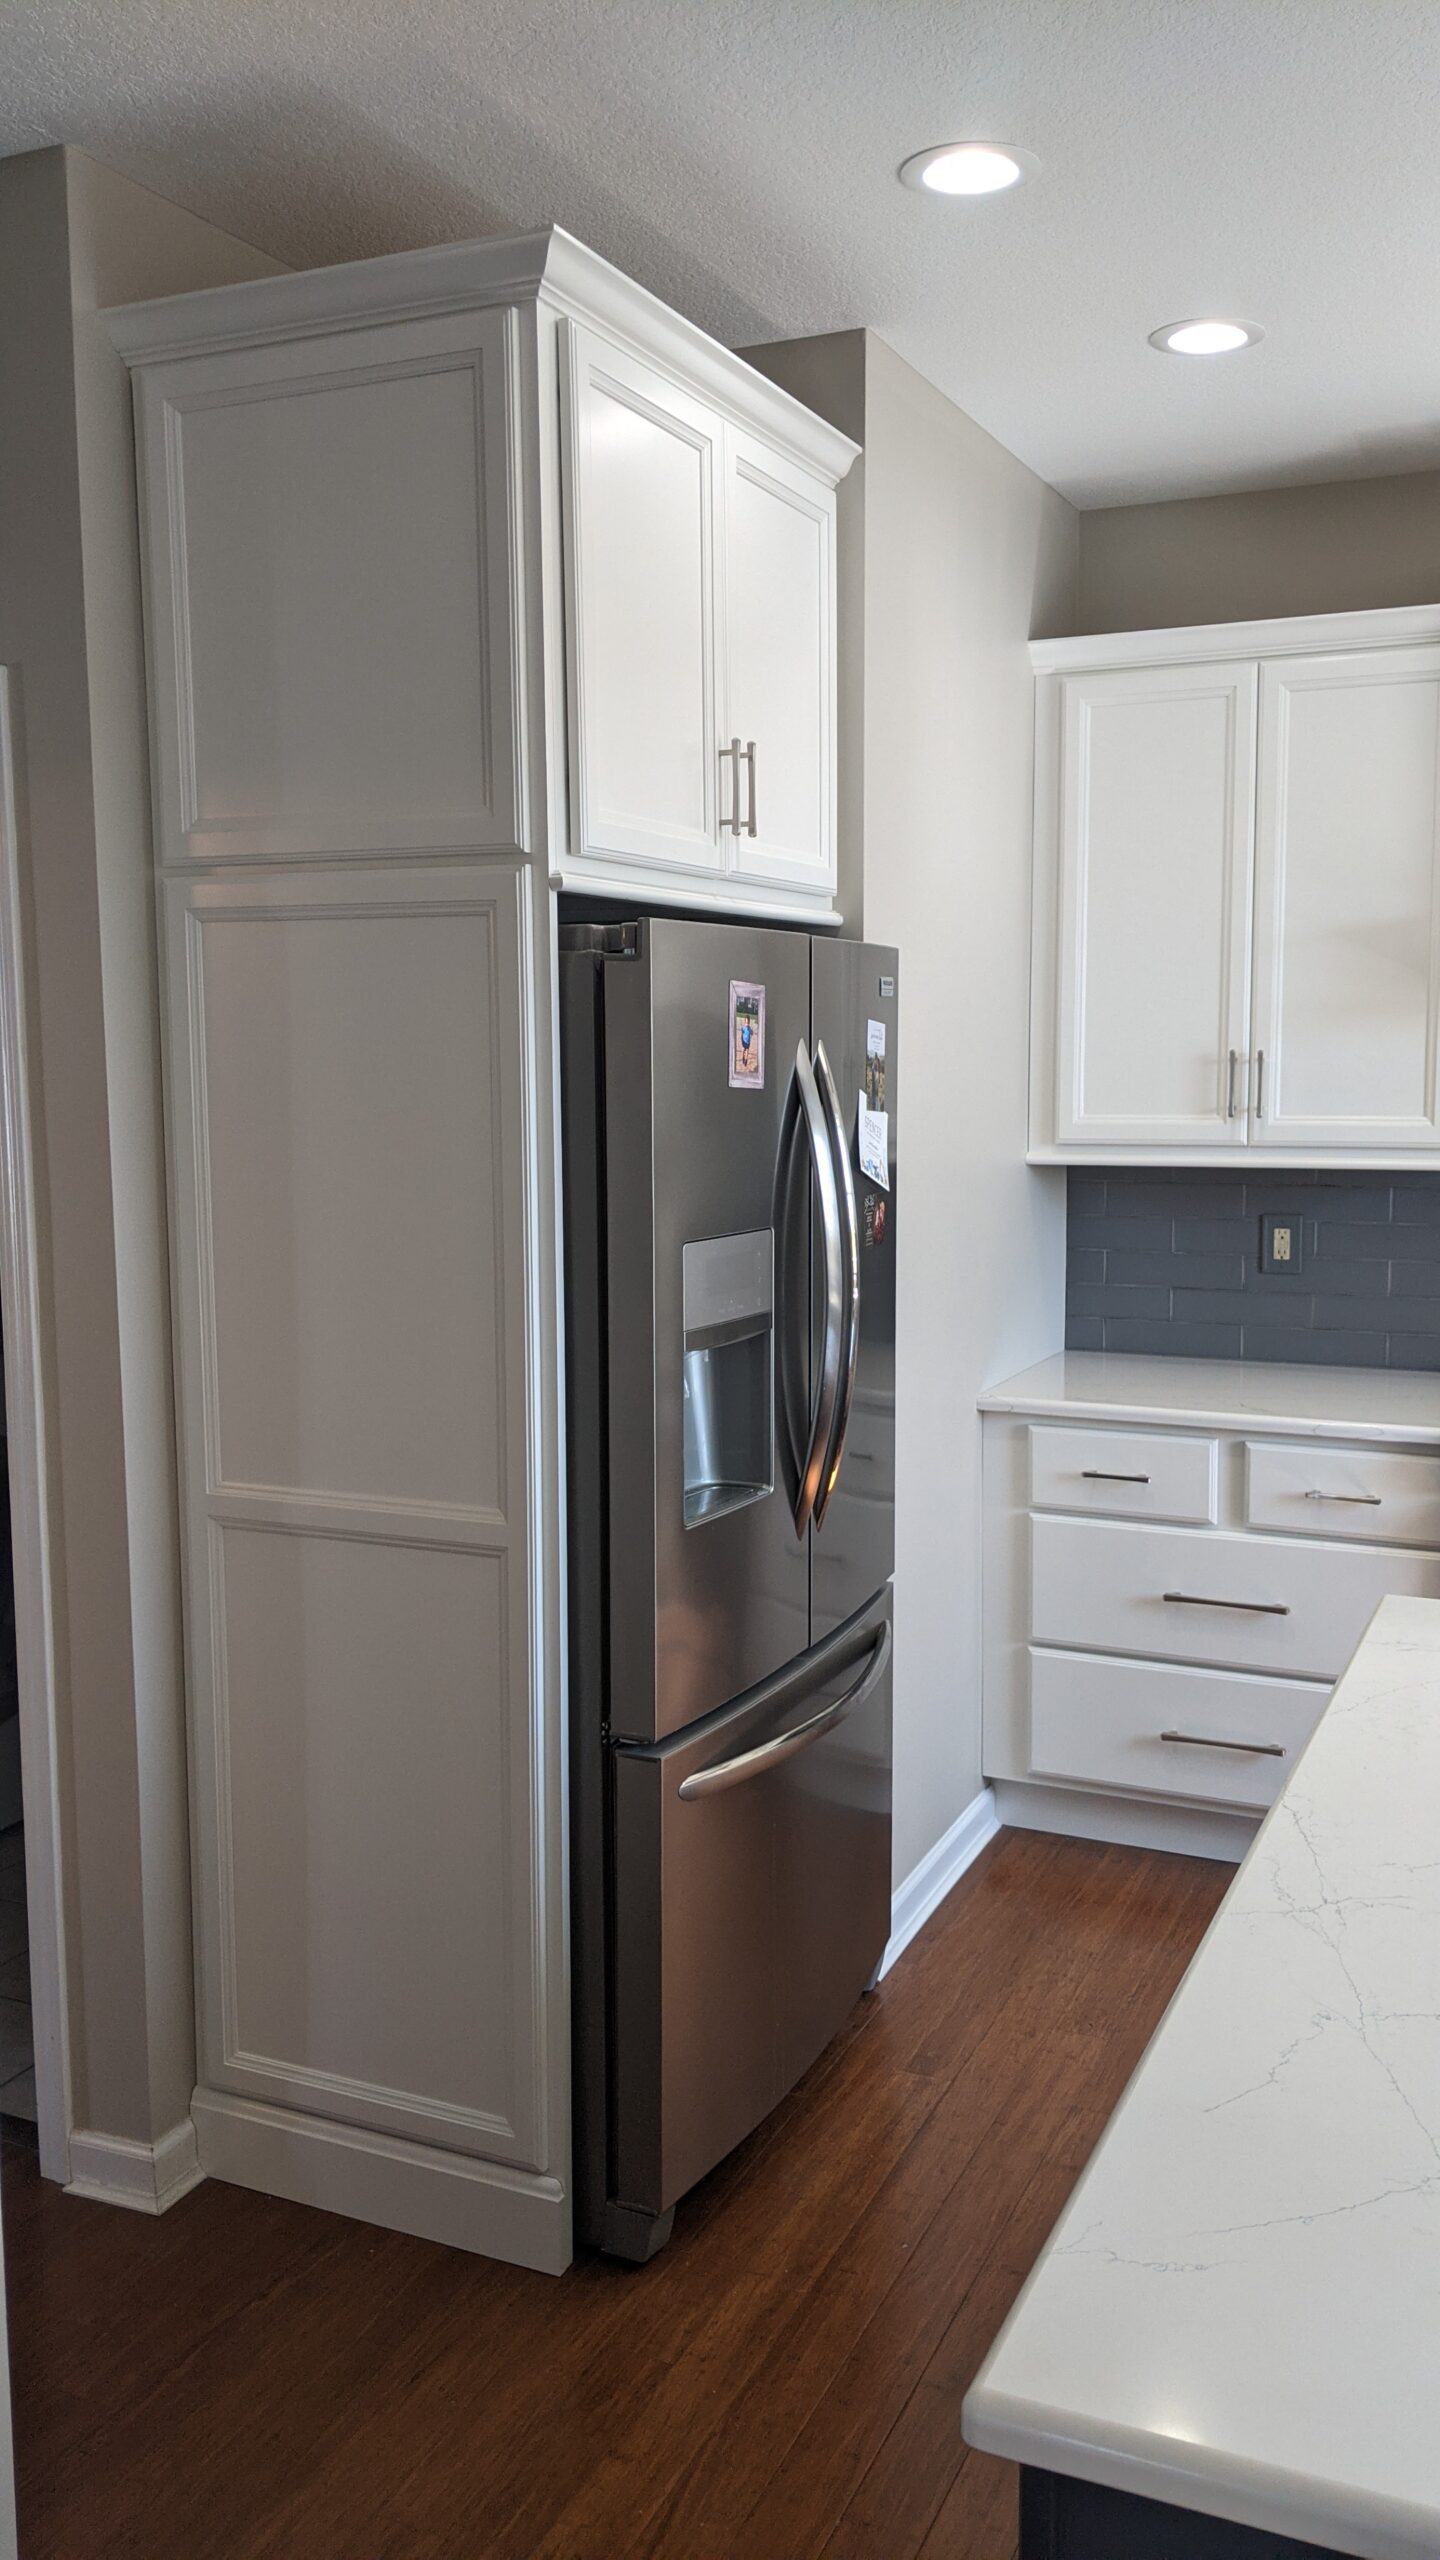 After picture showing the refrigerator area.